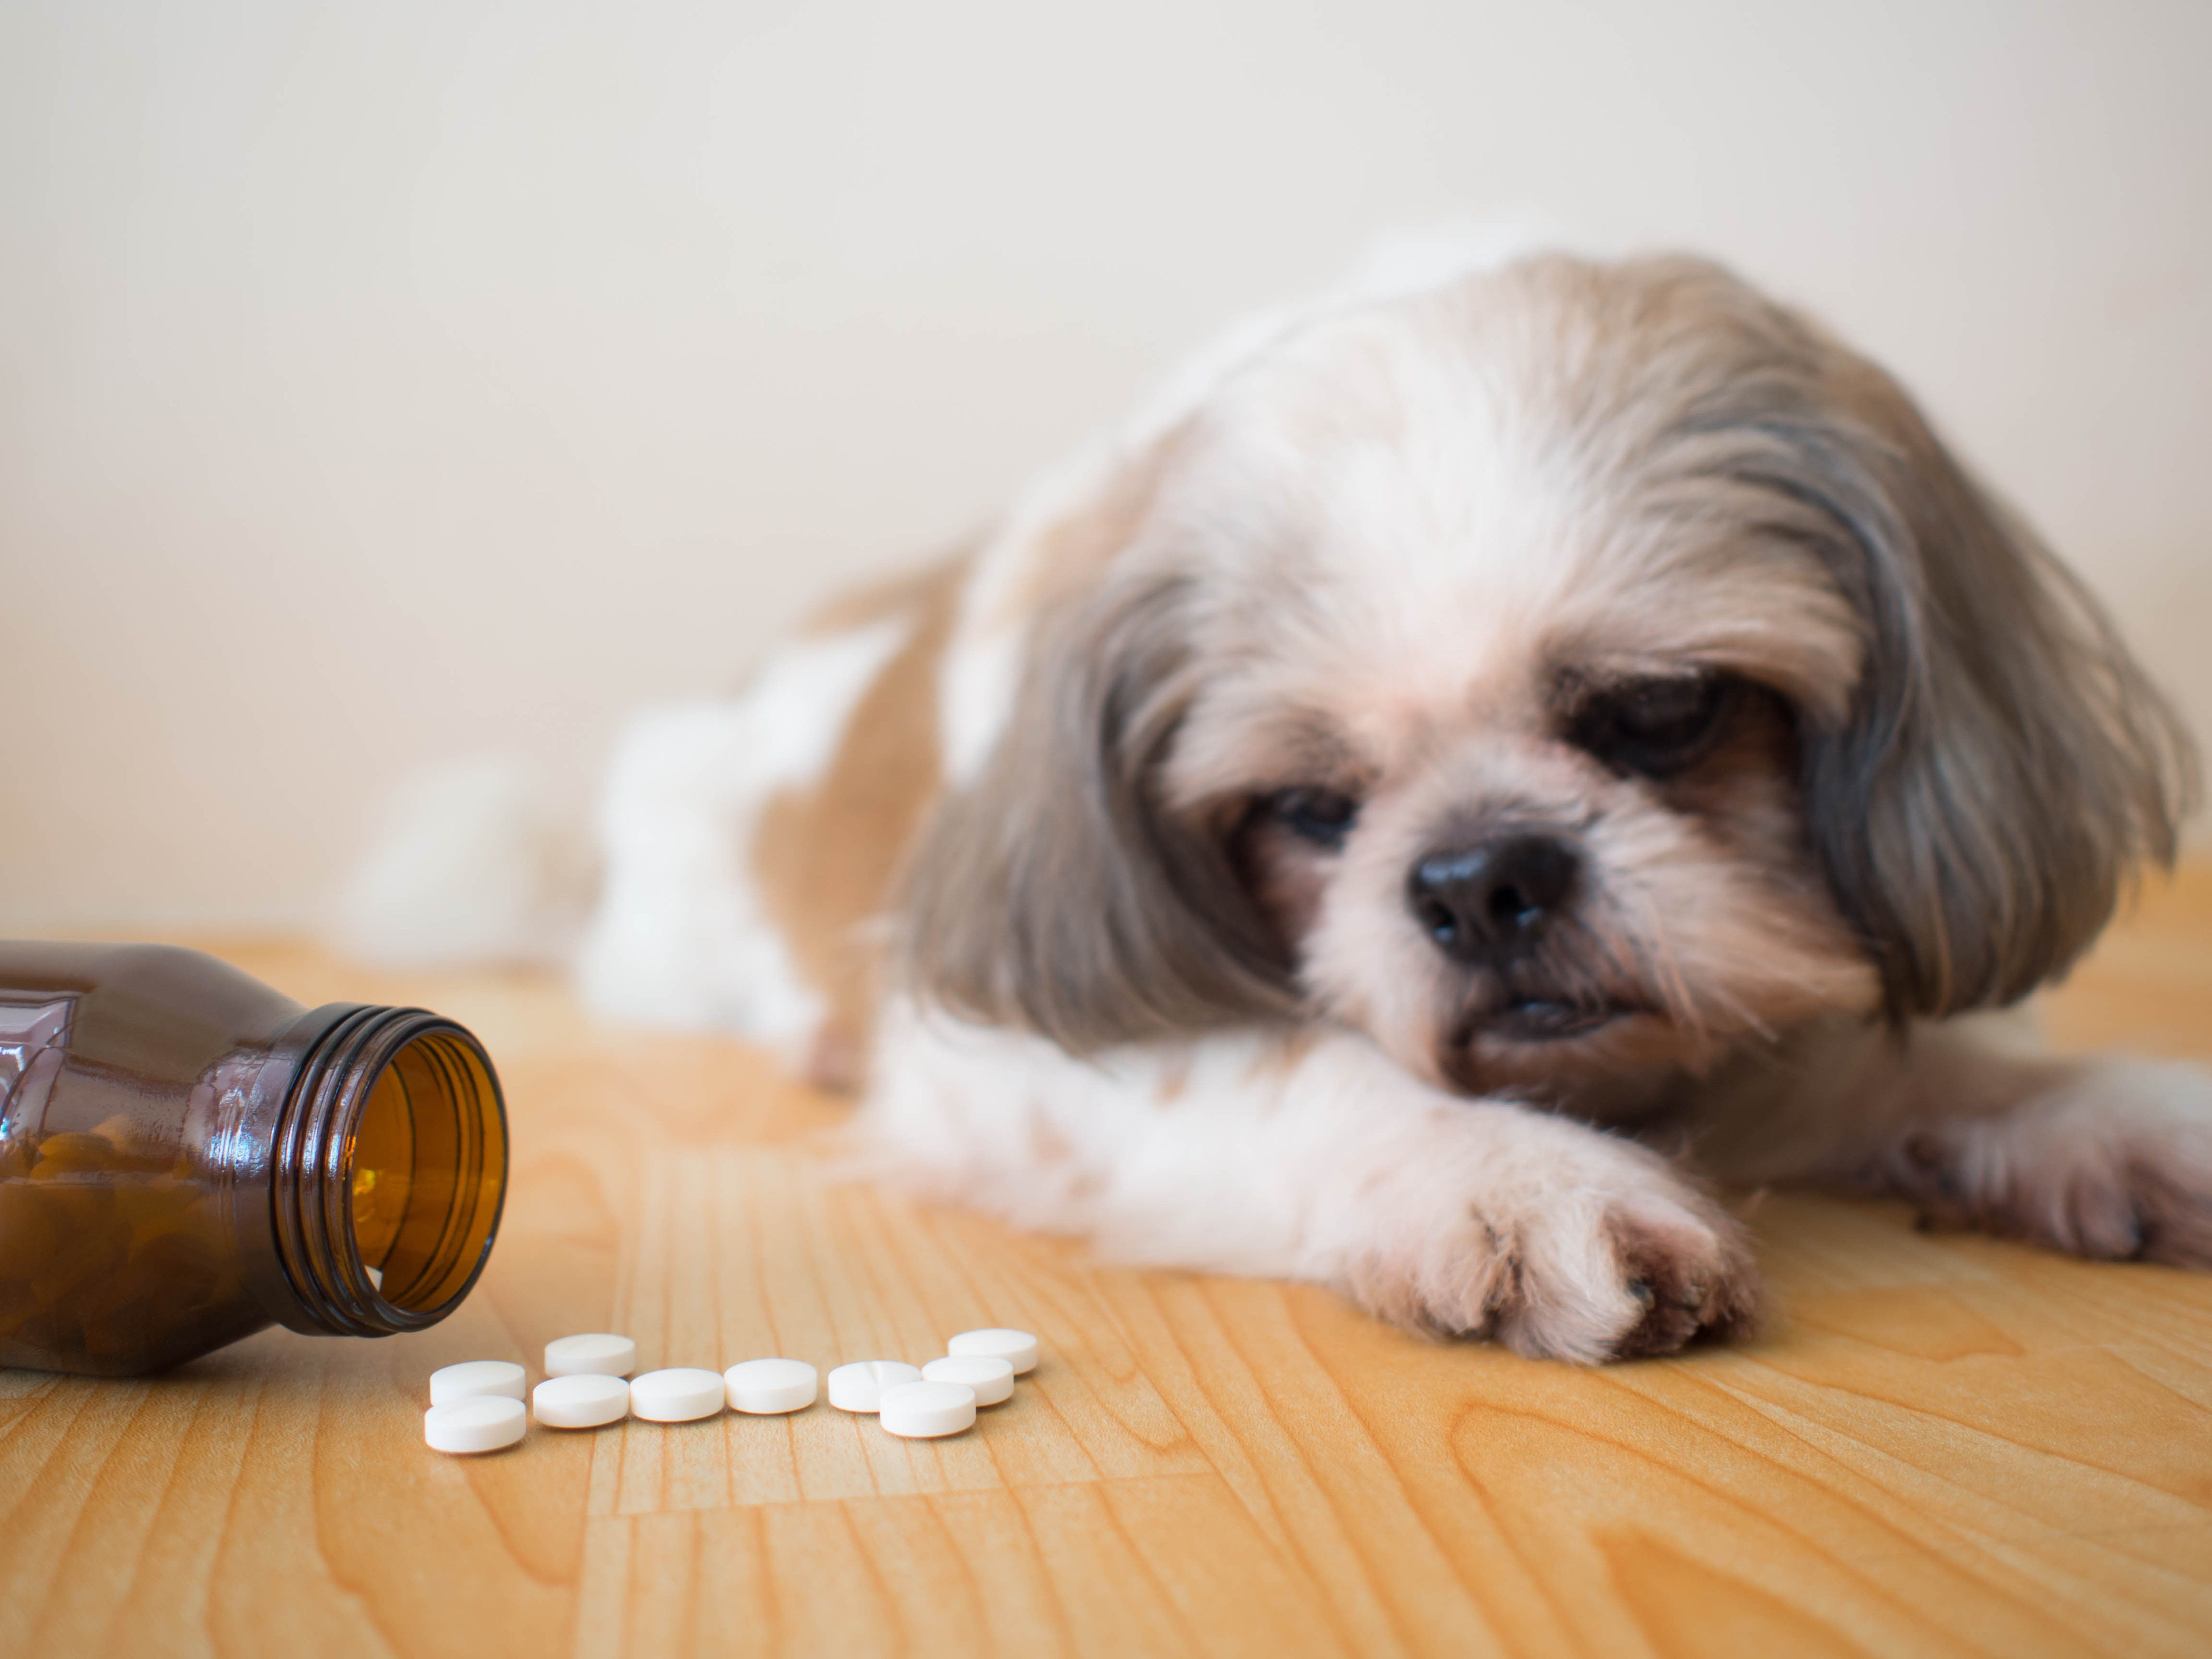 dog next to medication that is dangerous for pets